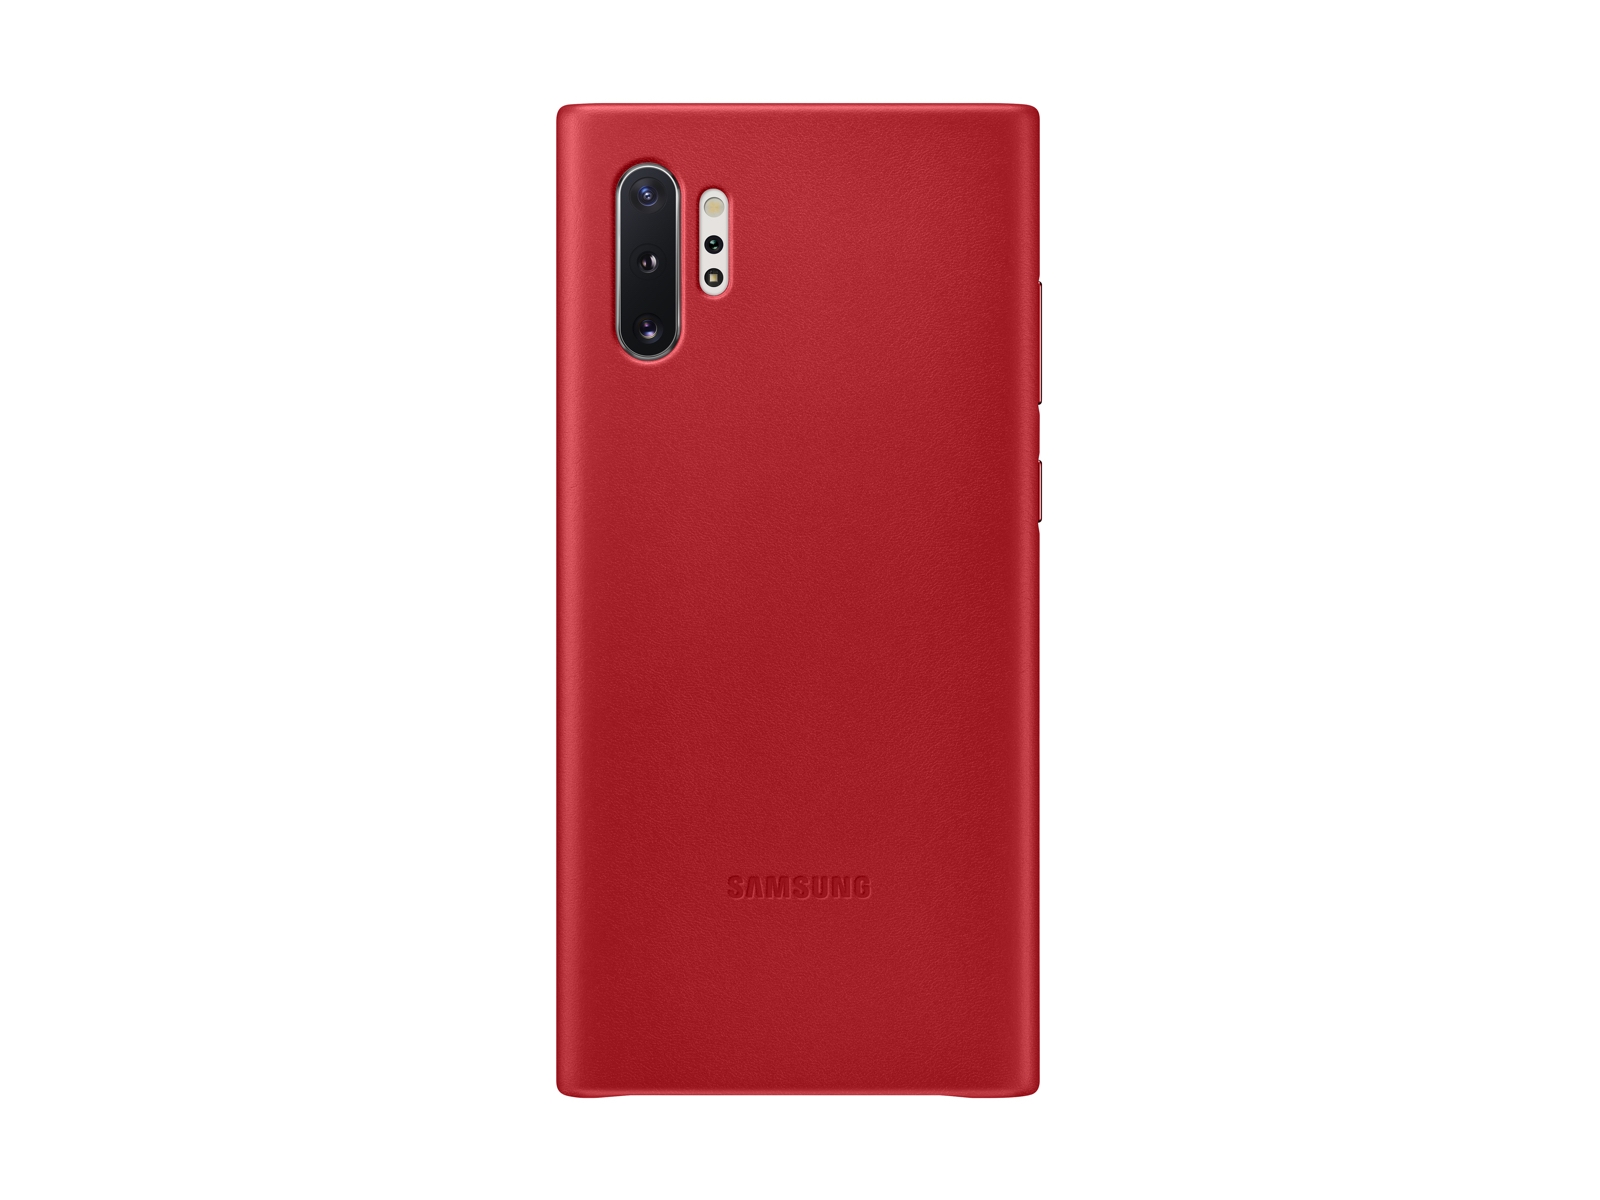 Thumbnail image of Galaxy Note10+ Leather Back Cover, Red